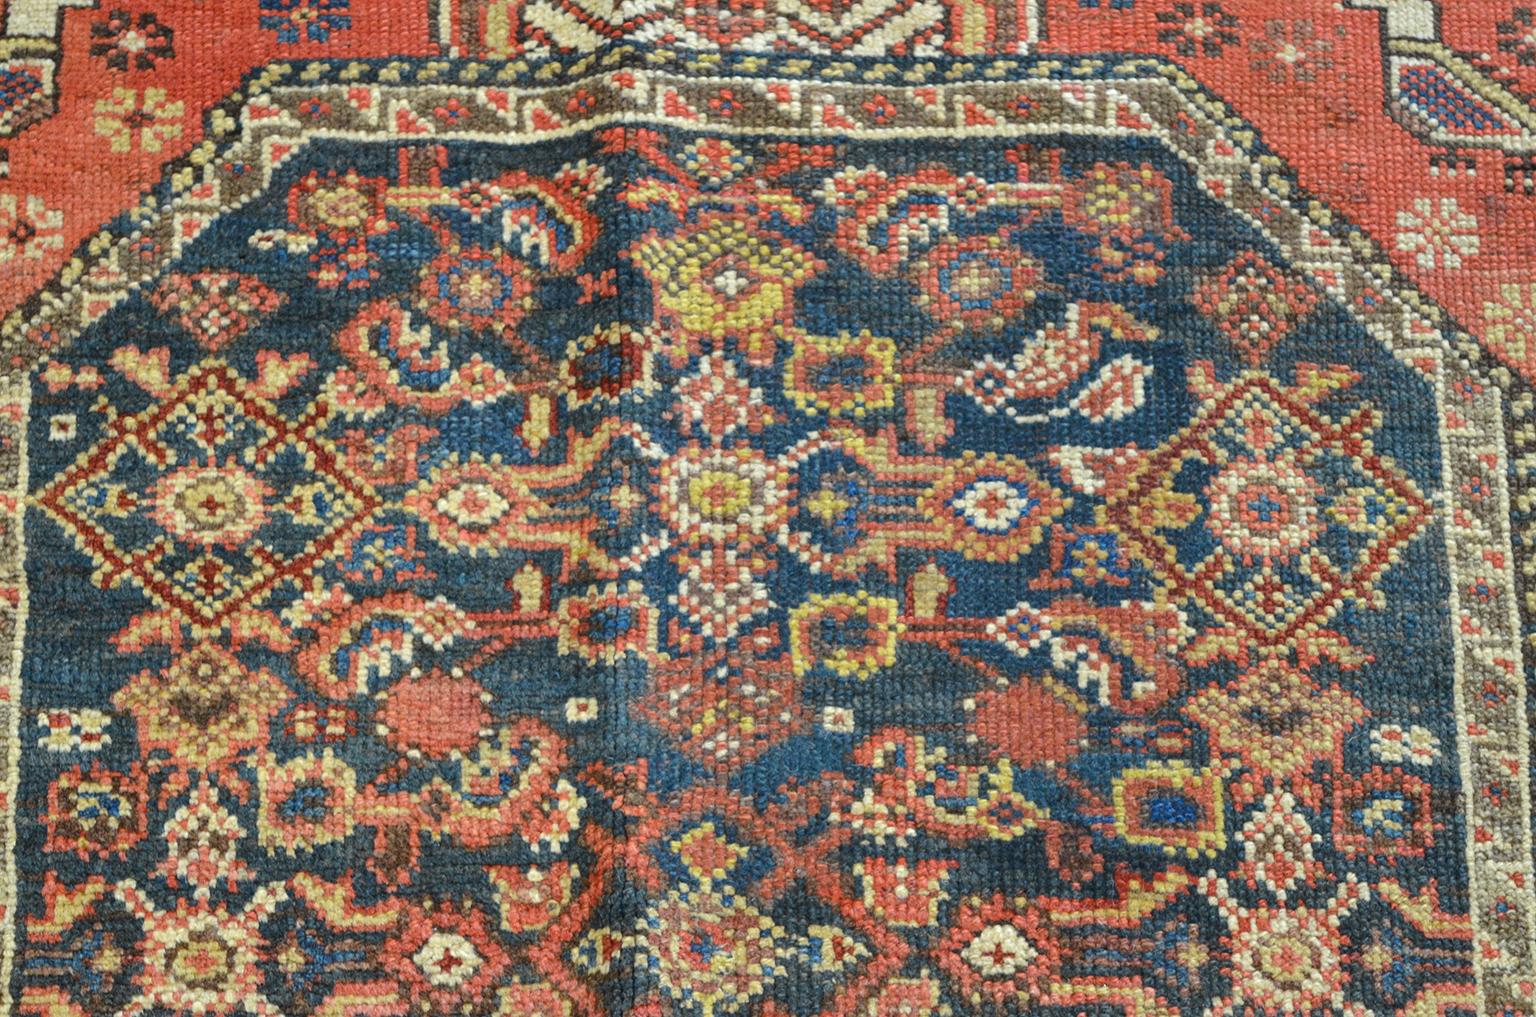 Late 19th Century Antique 1880s Persian Meeshan Melayer Rug, 6' x 9'